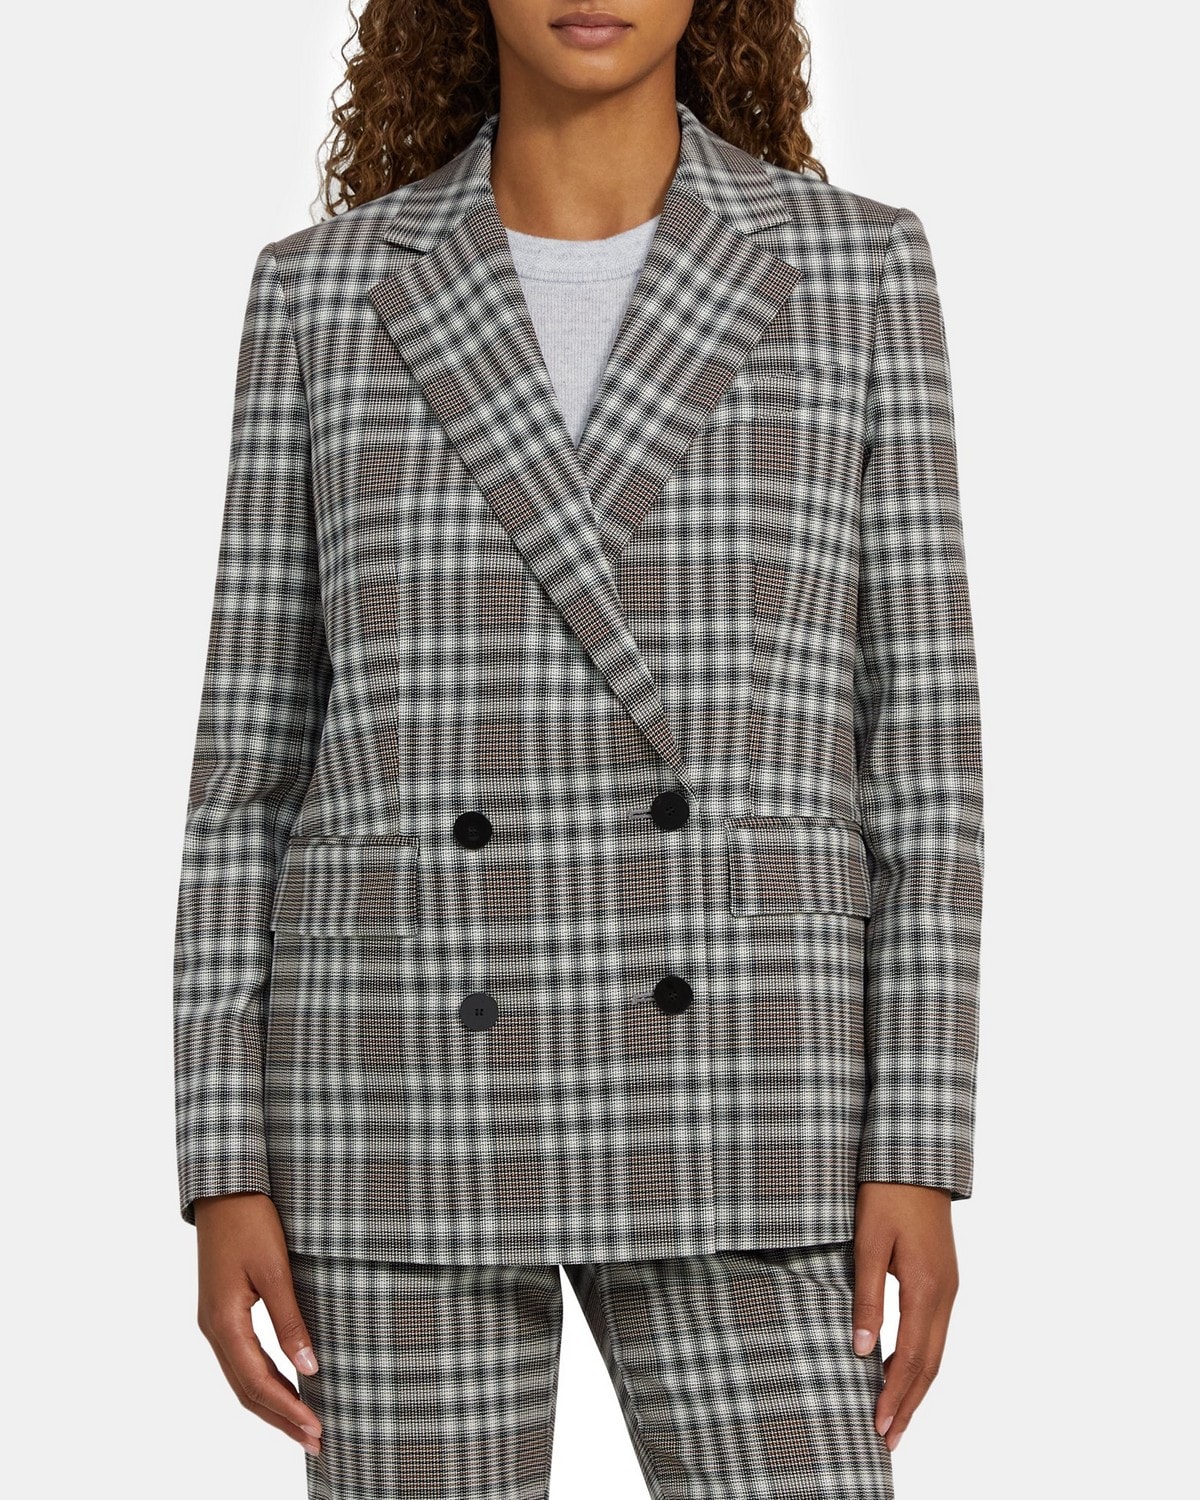 Double-Breasted Jacket in Plaid Wool